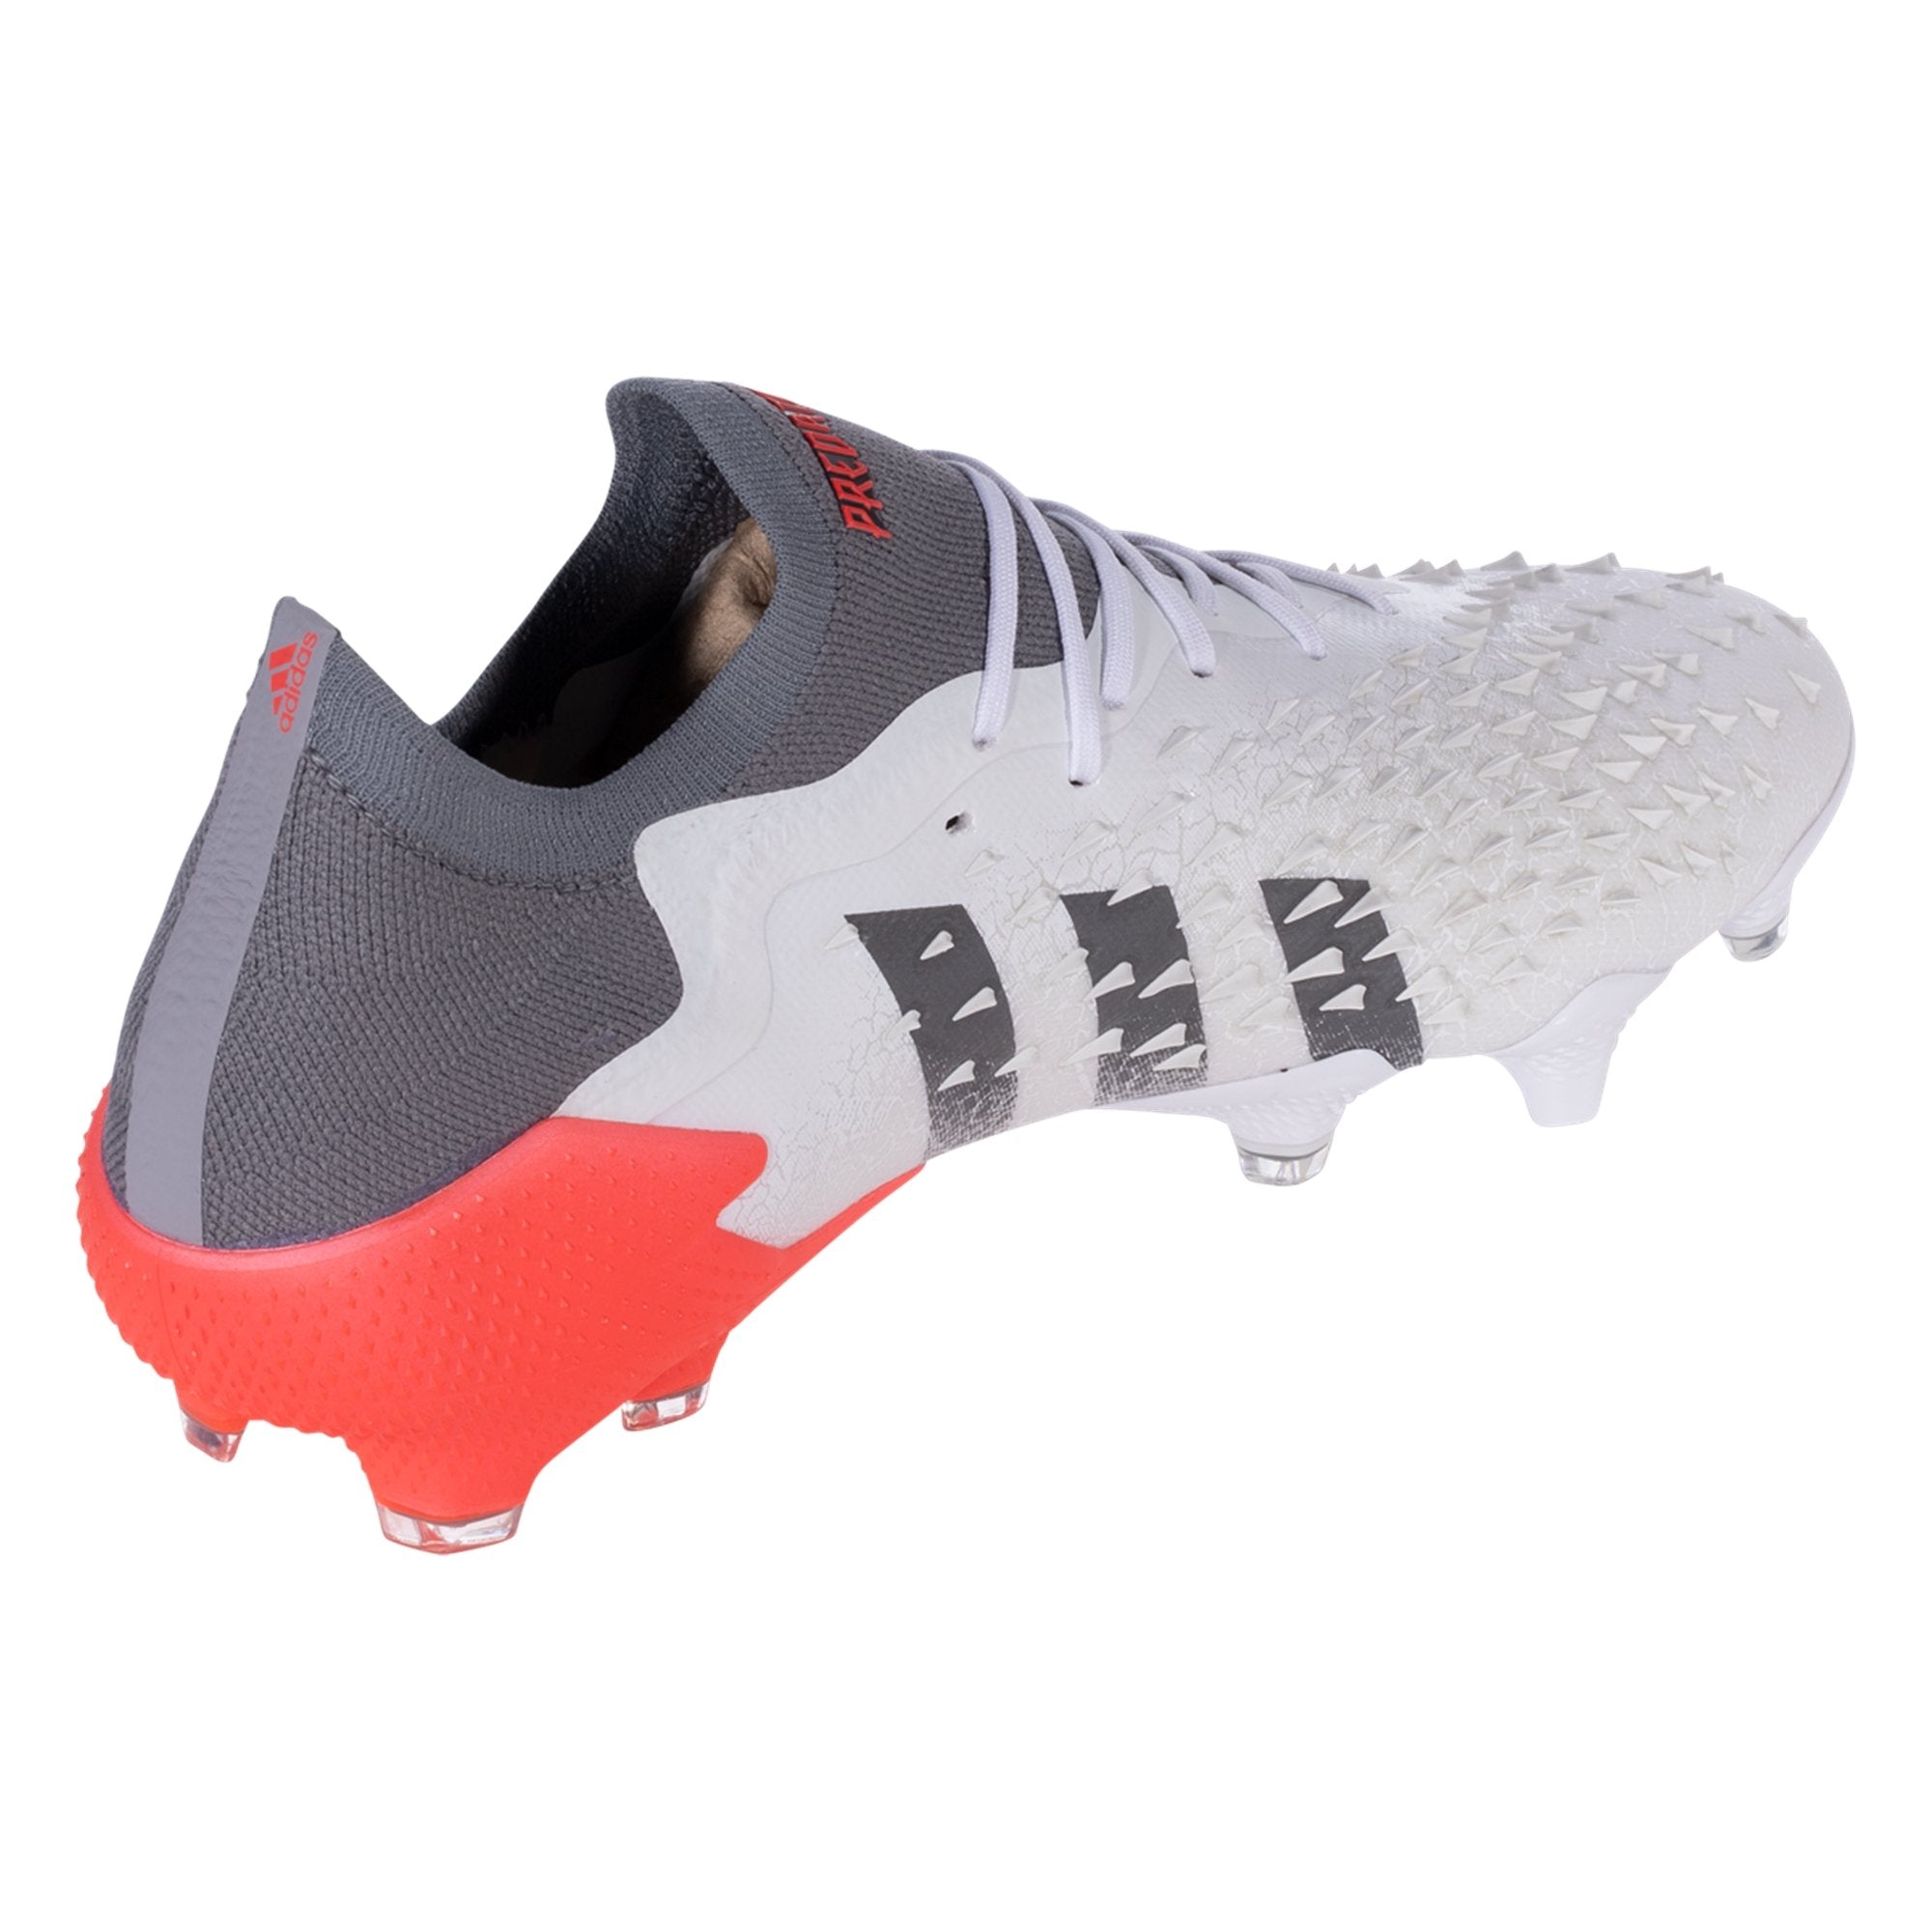 adidas Predator Freak .1 LOW Firm Ground Soccer Cleat - Red/Core  Black/Solar Red FY6266 – Soccer Zone USA